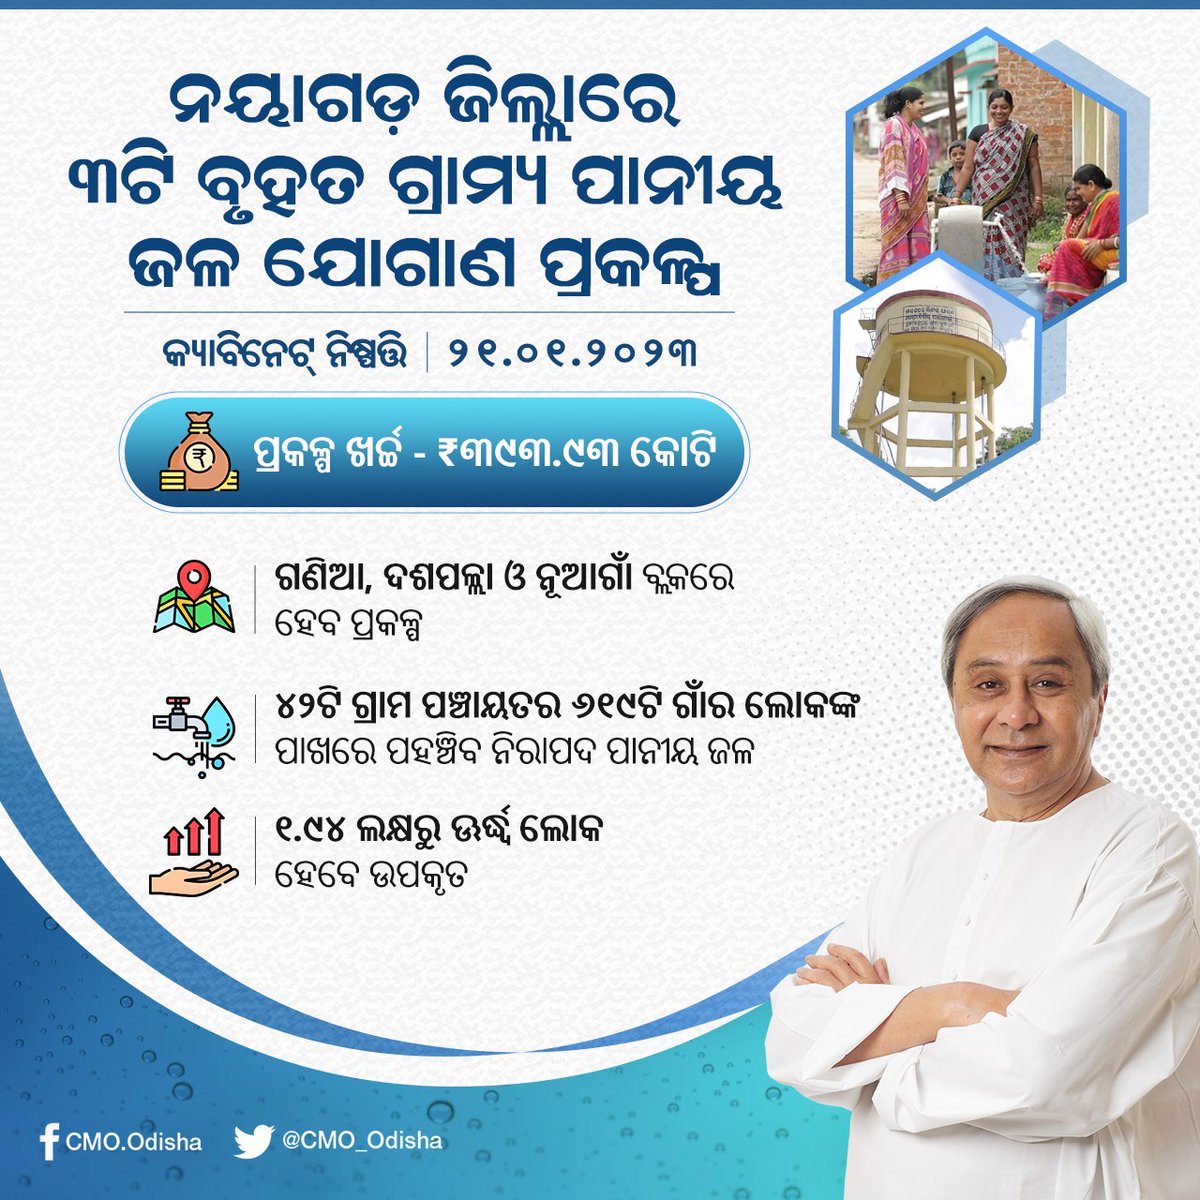 #Odisha Govt is committed to provide drinking water to every household. In line with this #OdishaCabinet approved Mega Drinking Water Projects:

➡️Projects worth Rs 639.26 Cr in Malkangiri

➡️Projects worth Rs 393.93 Cr in Nayagarh

➡️Projects worth Rs 254,66 Cr in Jajpur